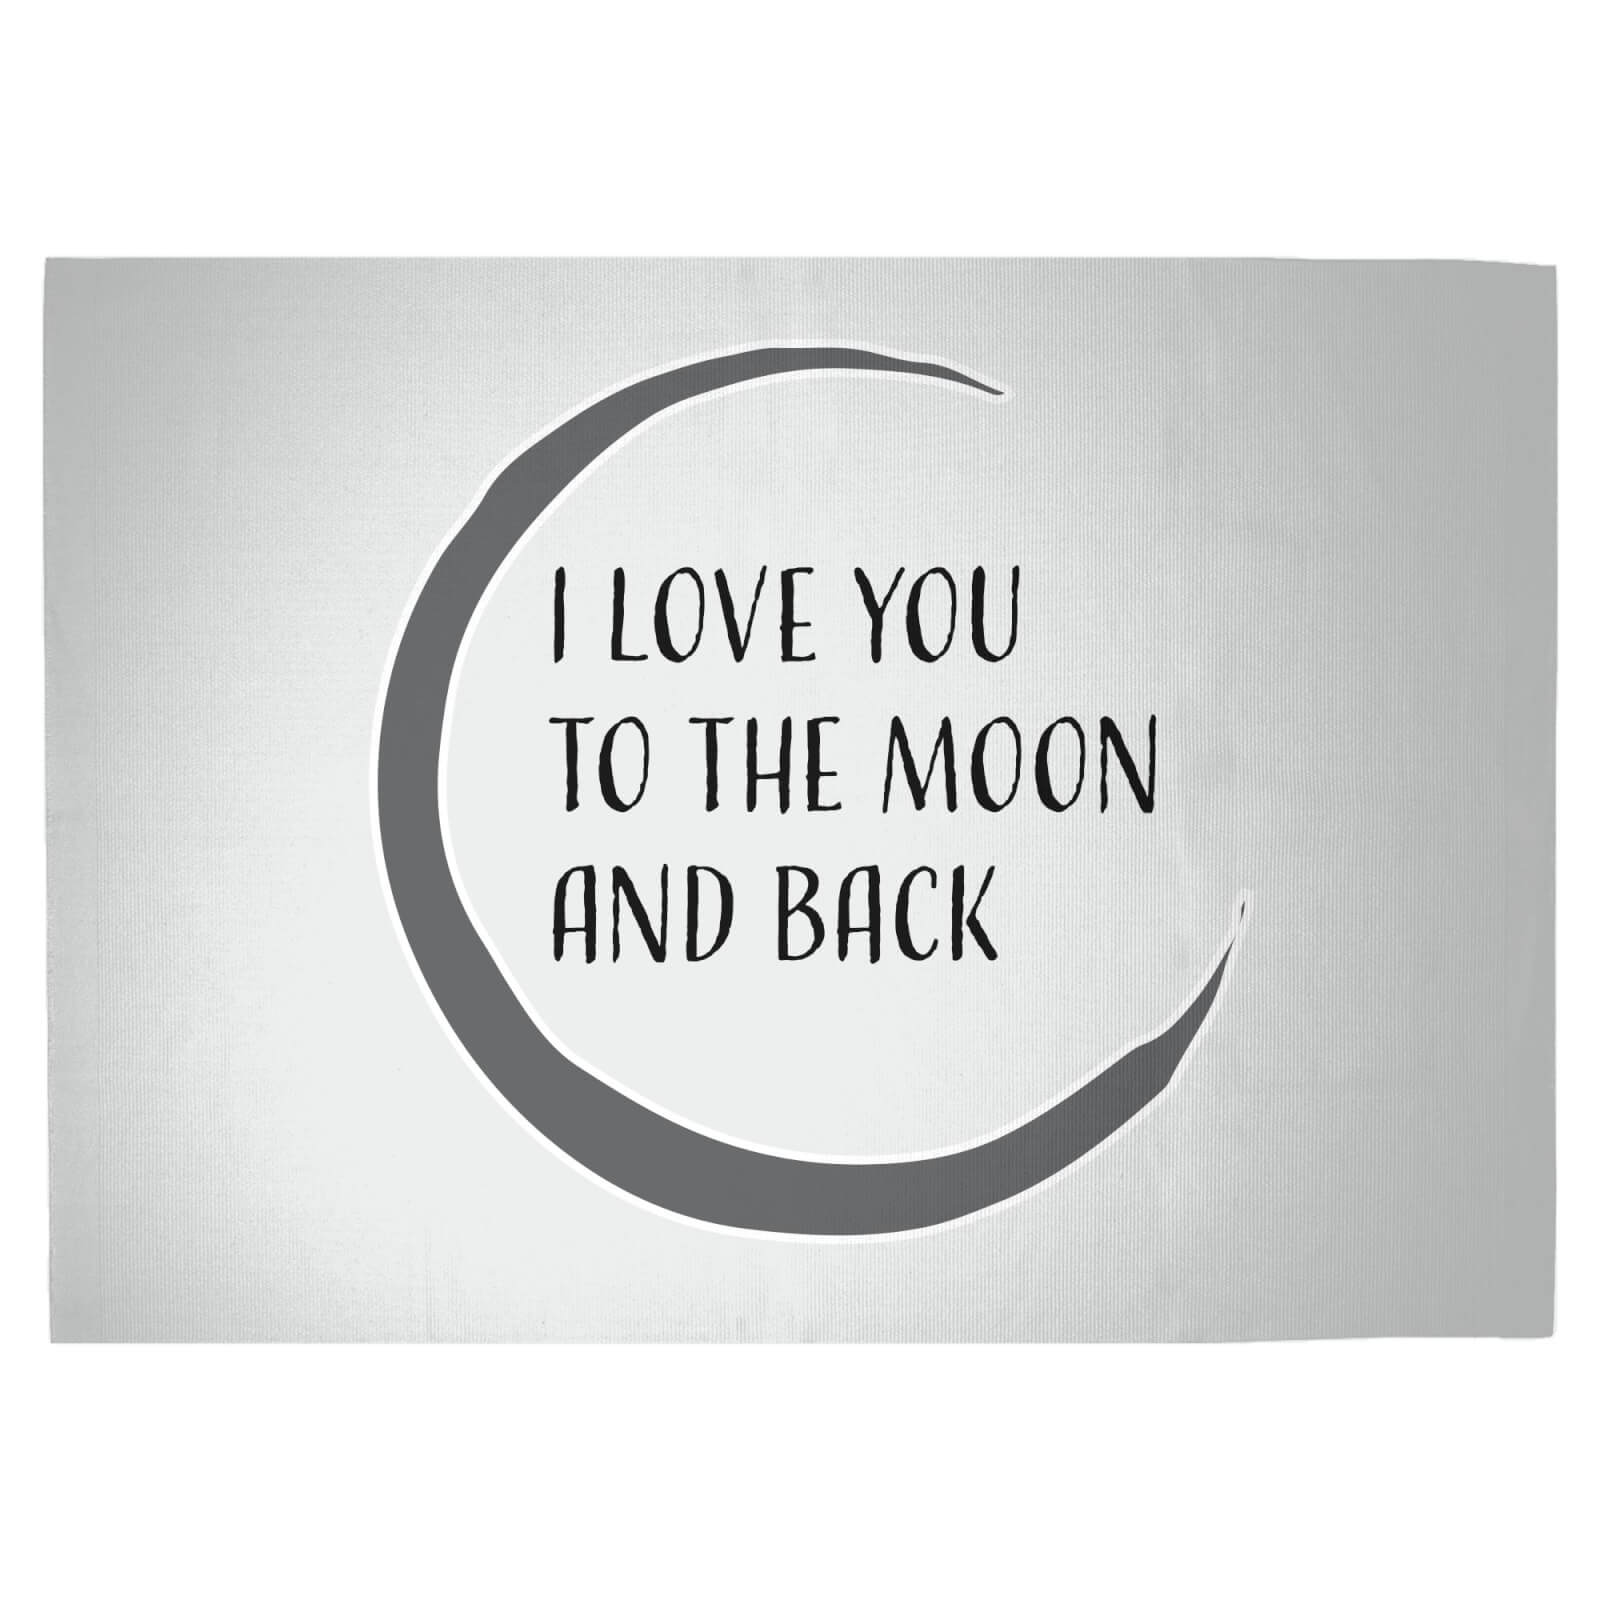 I Love You To The Moon And Back Woven Rug - Large